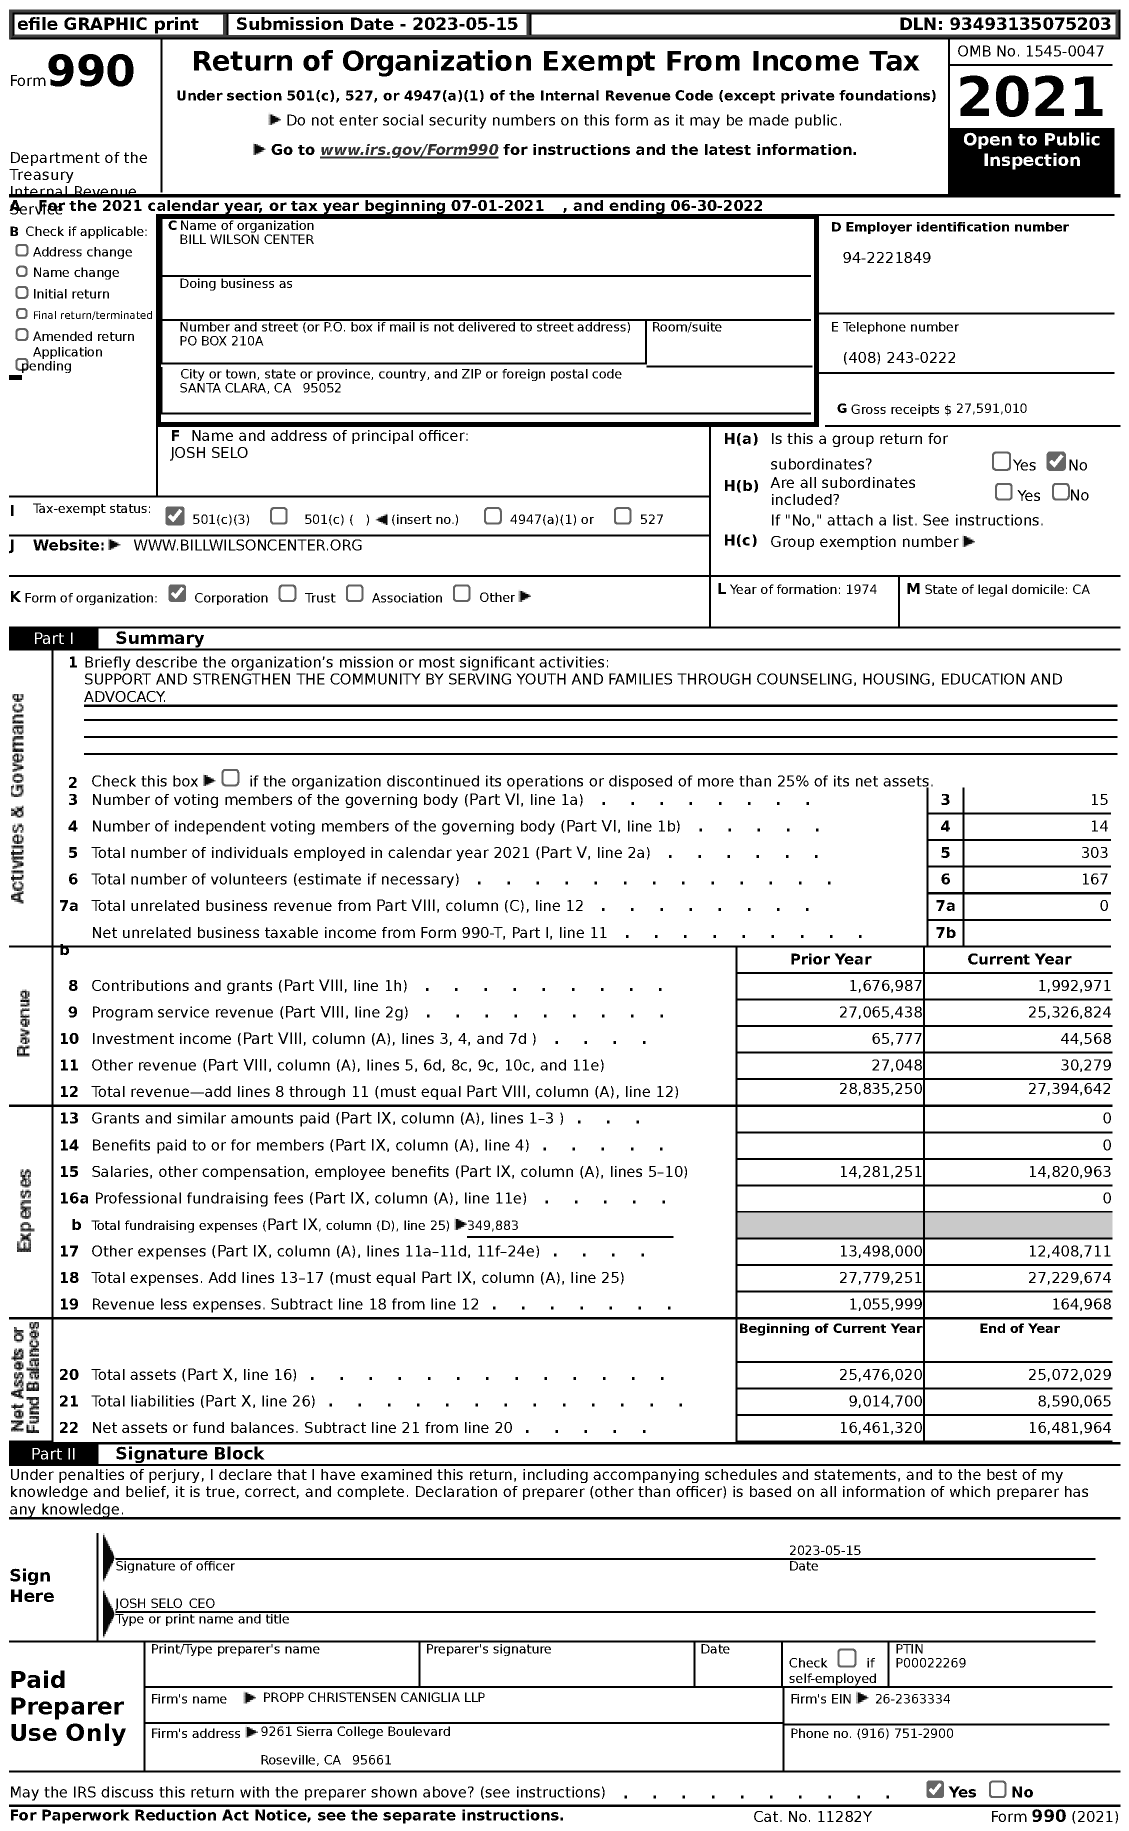 Image of first page of 2021 Form 990 for Bill Wilson Center (BWC)